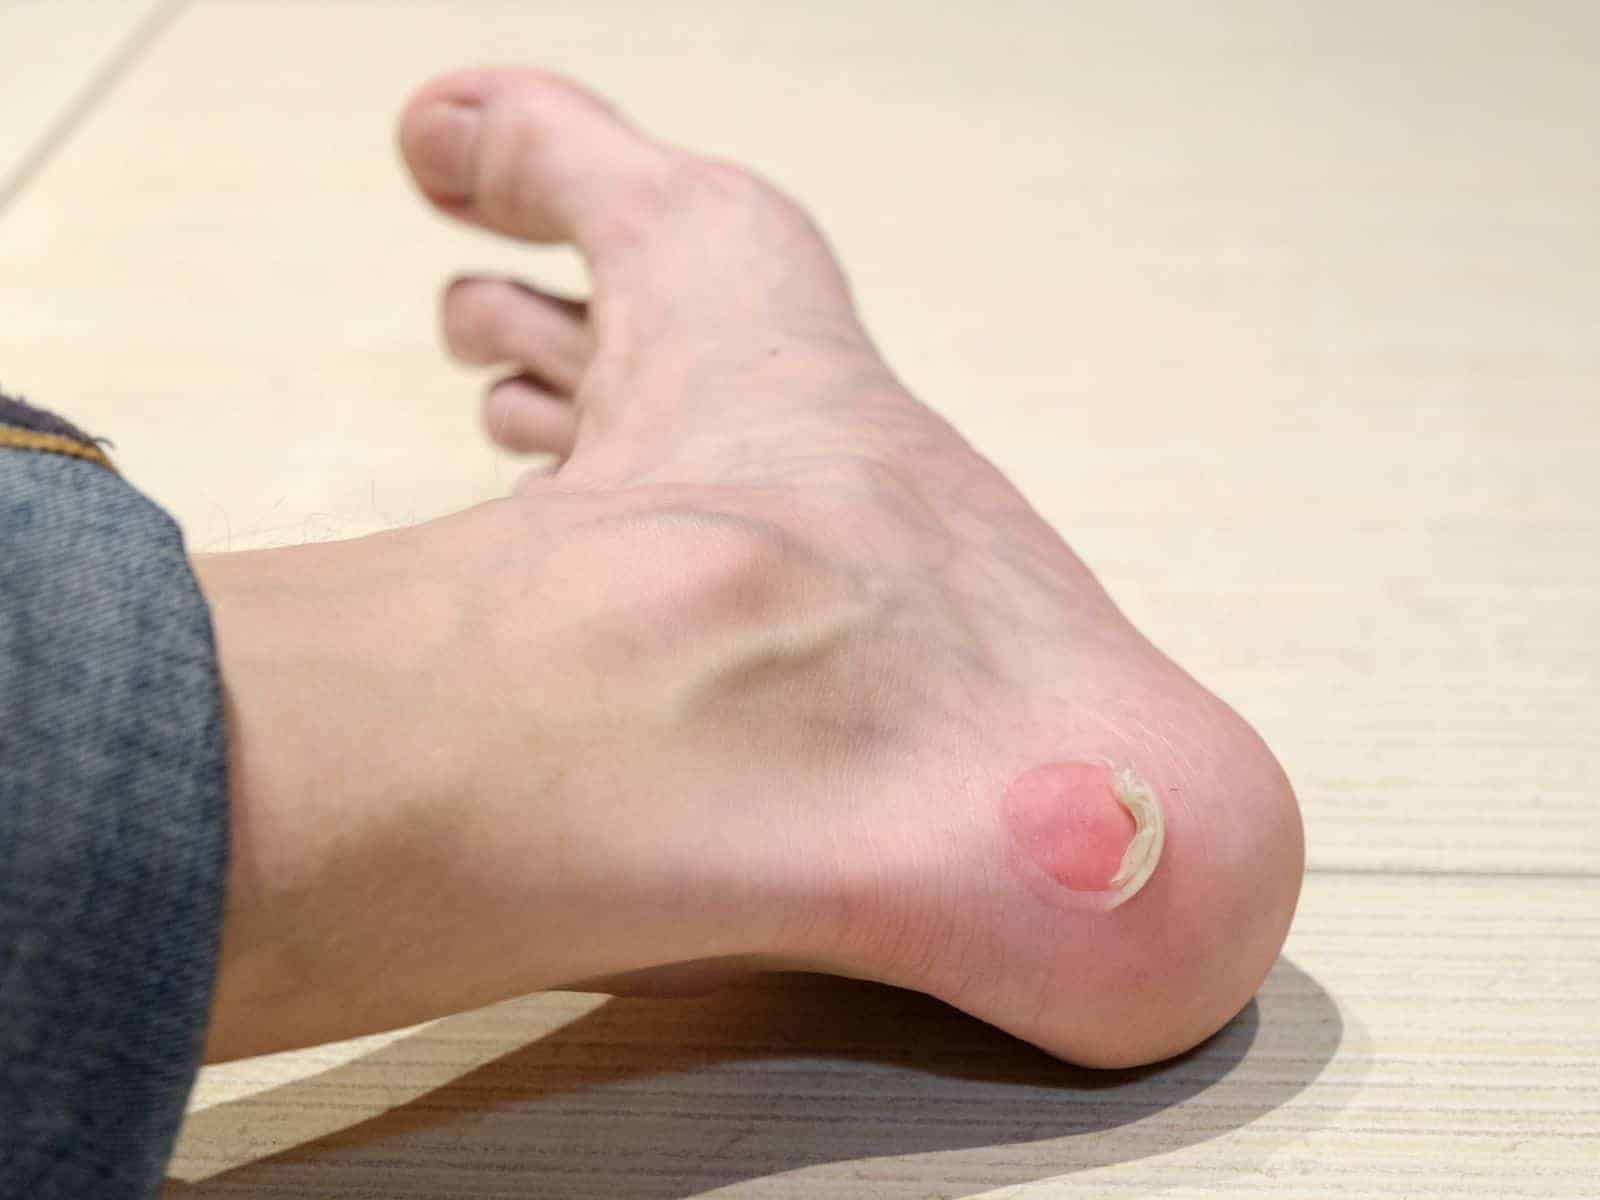 6 Easy Ways to Prevent Foot Blisters + What to Do if It’s Too Late